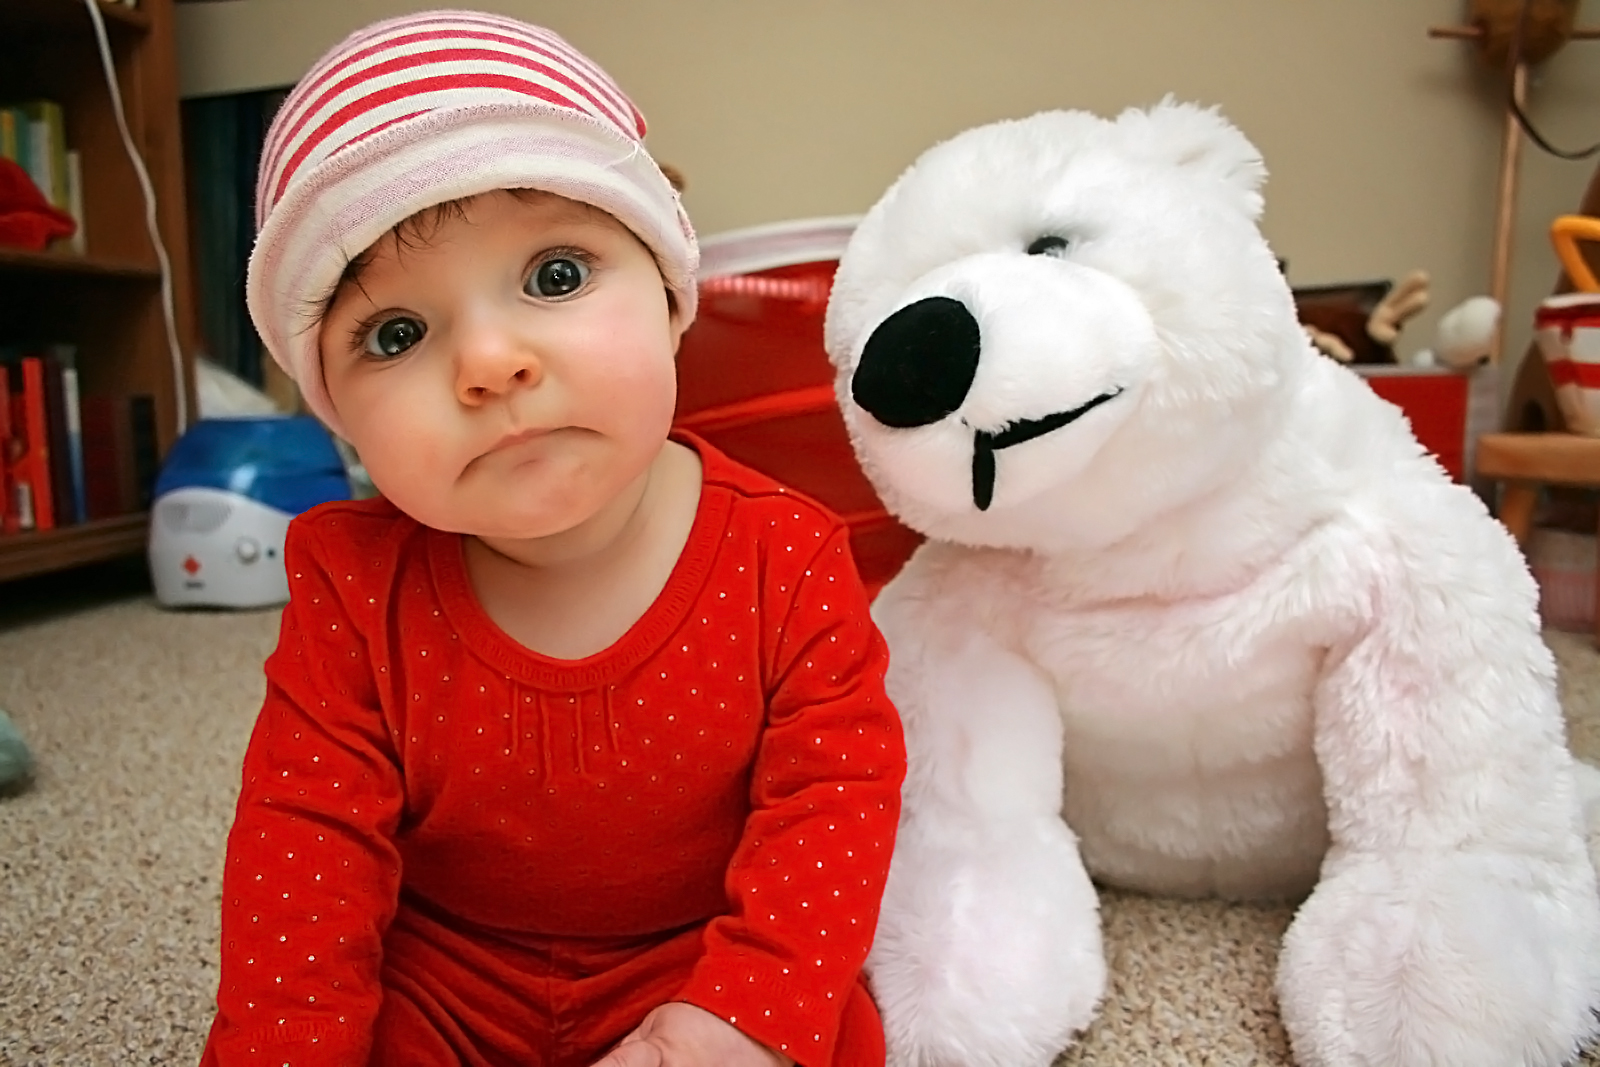 Take Photos of a Baby Next to a Stuffed Animal